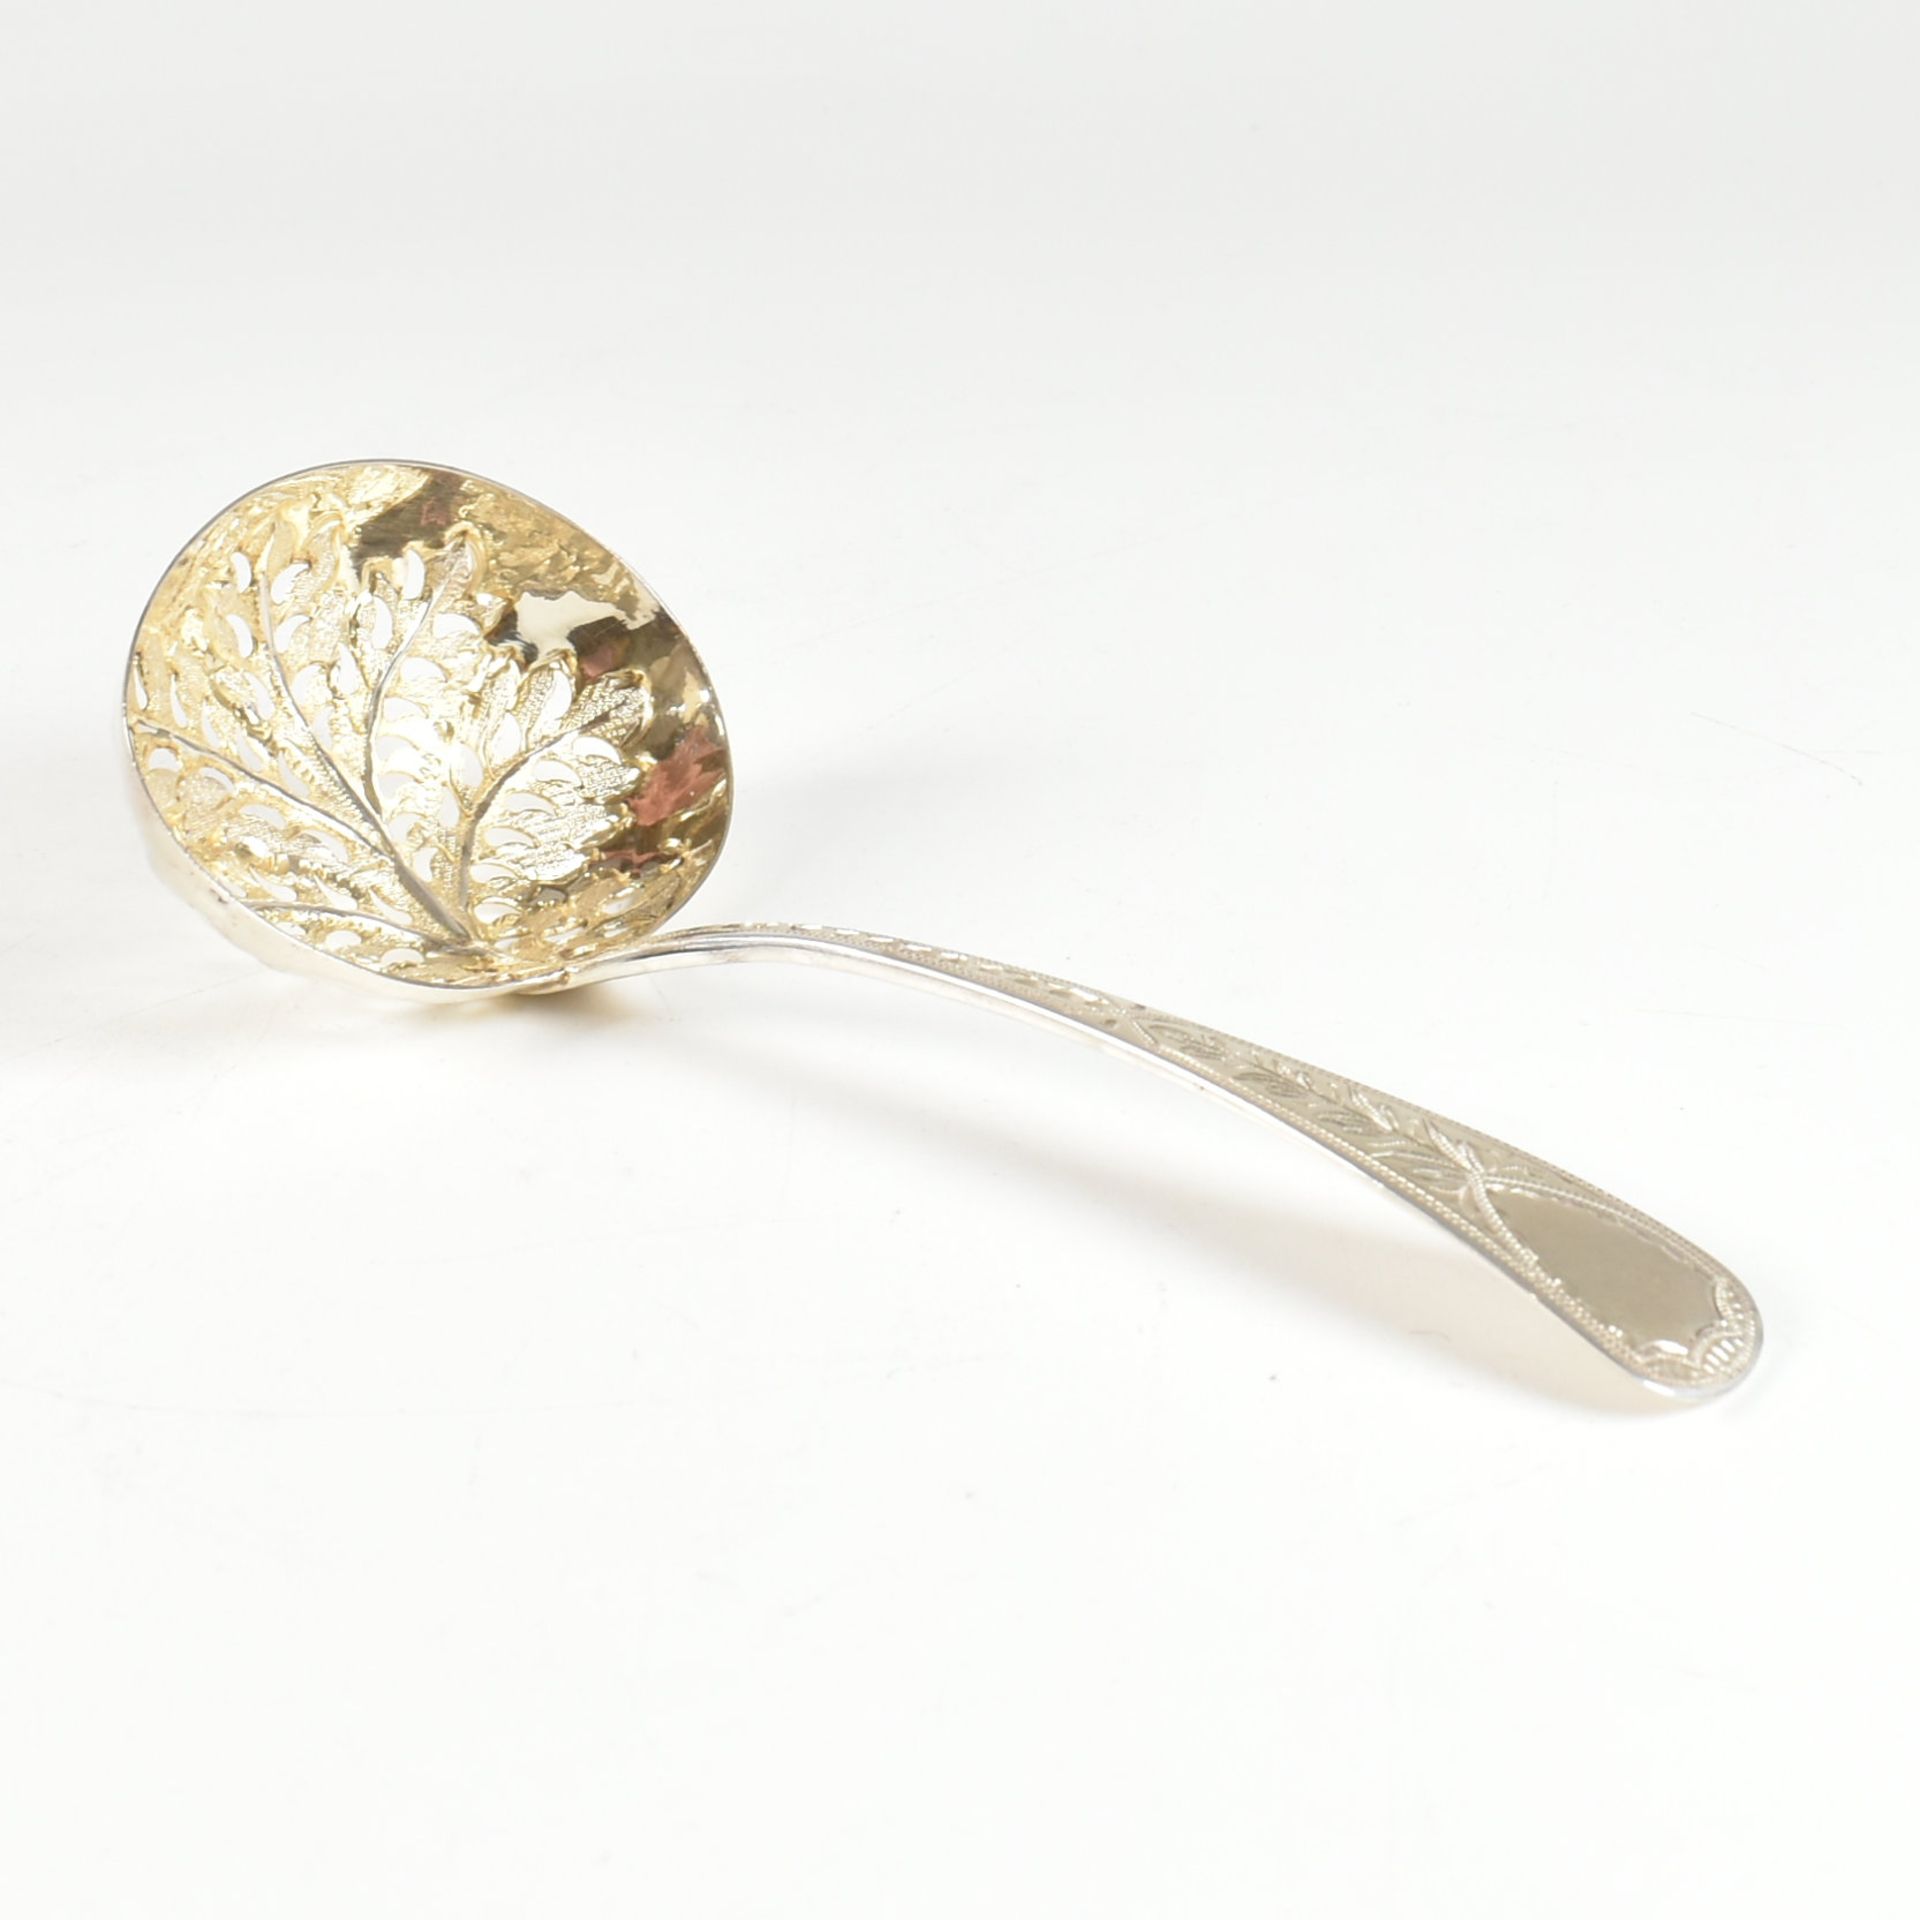 CASED GEORGE II HALLMARKED SILVER SUGAR SIFTER SPOON - Image 4 of 12